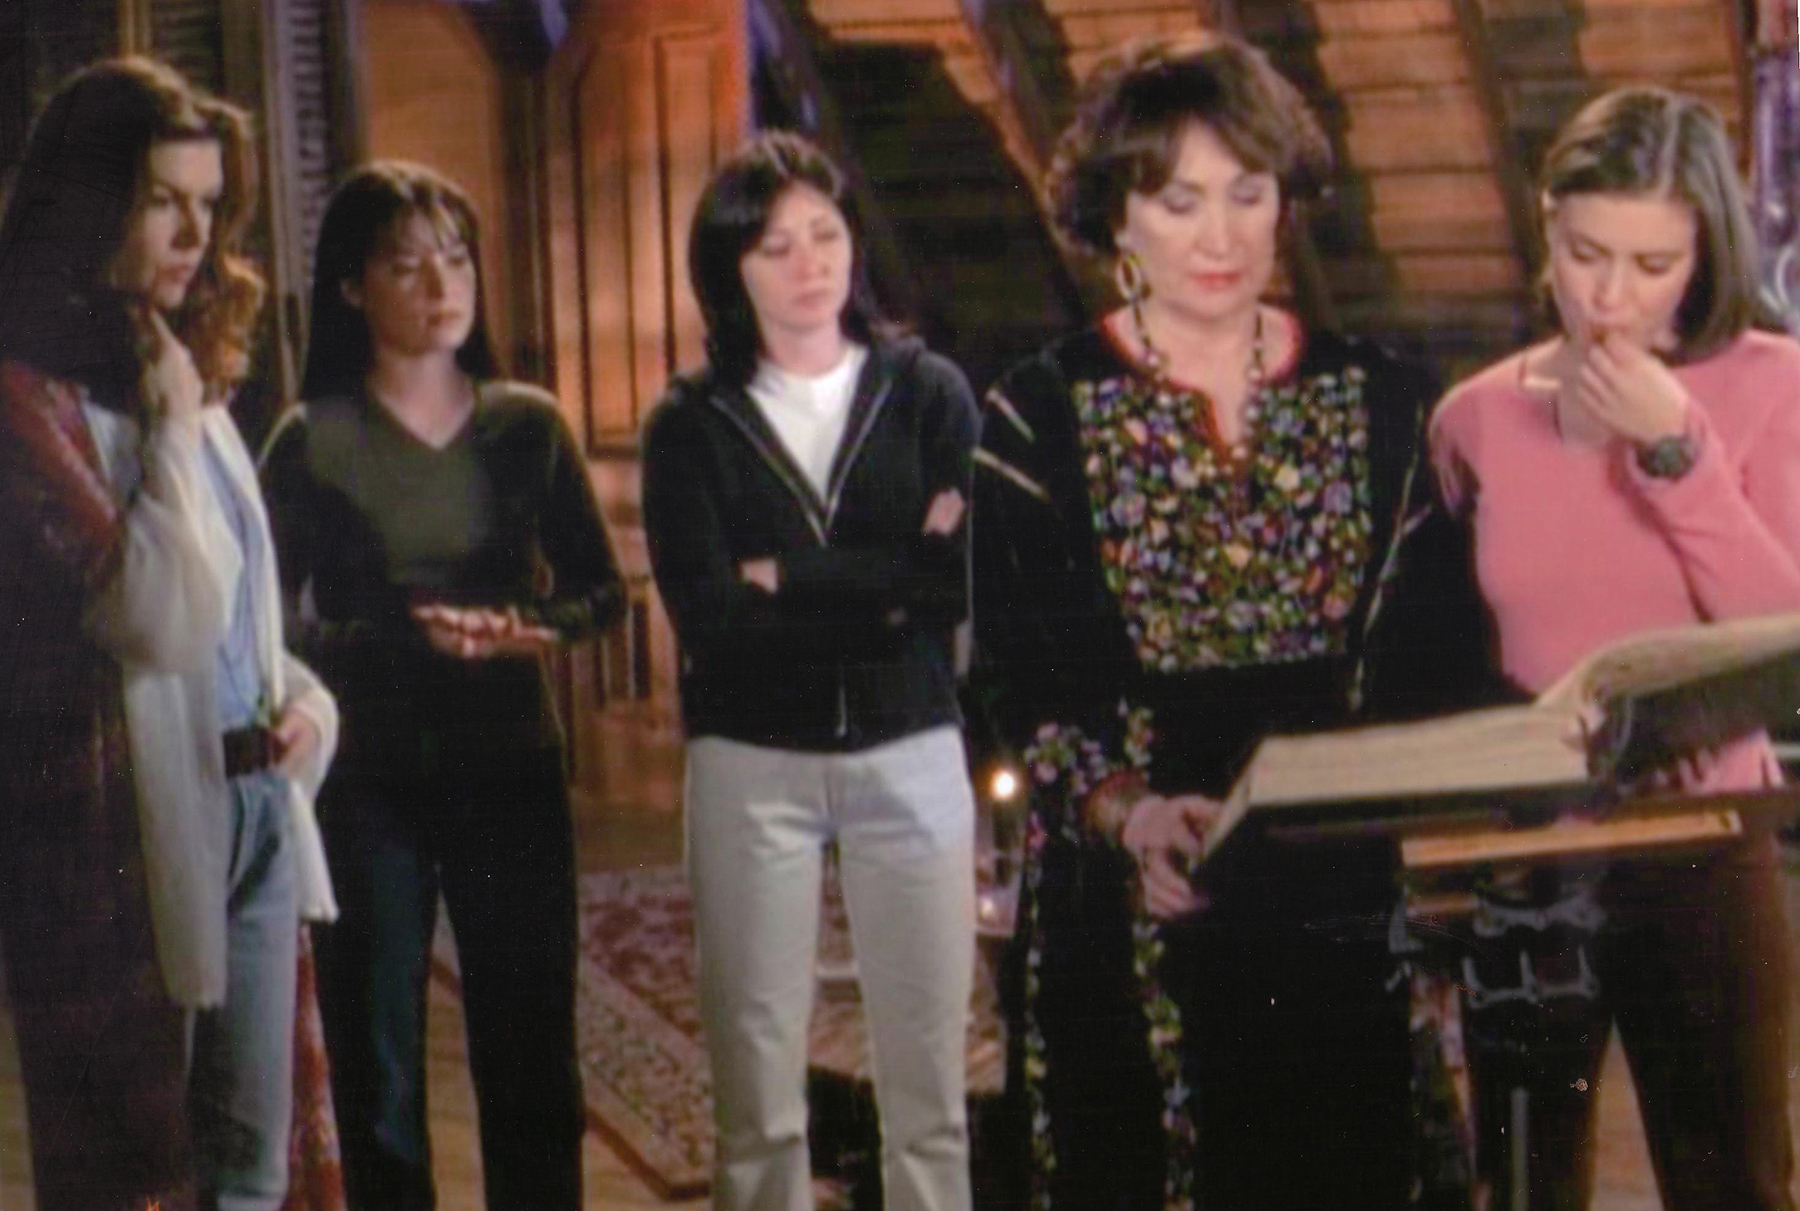 Jennifer Rhodes with Alyssa Milano, Shannon Doherty, Holly Marie Combs and Finola Hughes on the set of CHARMED.